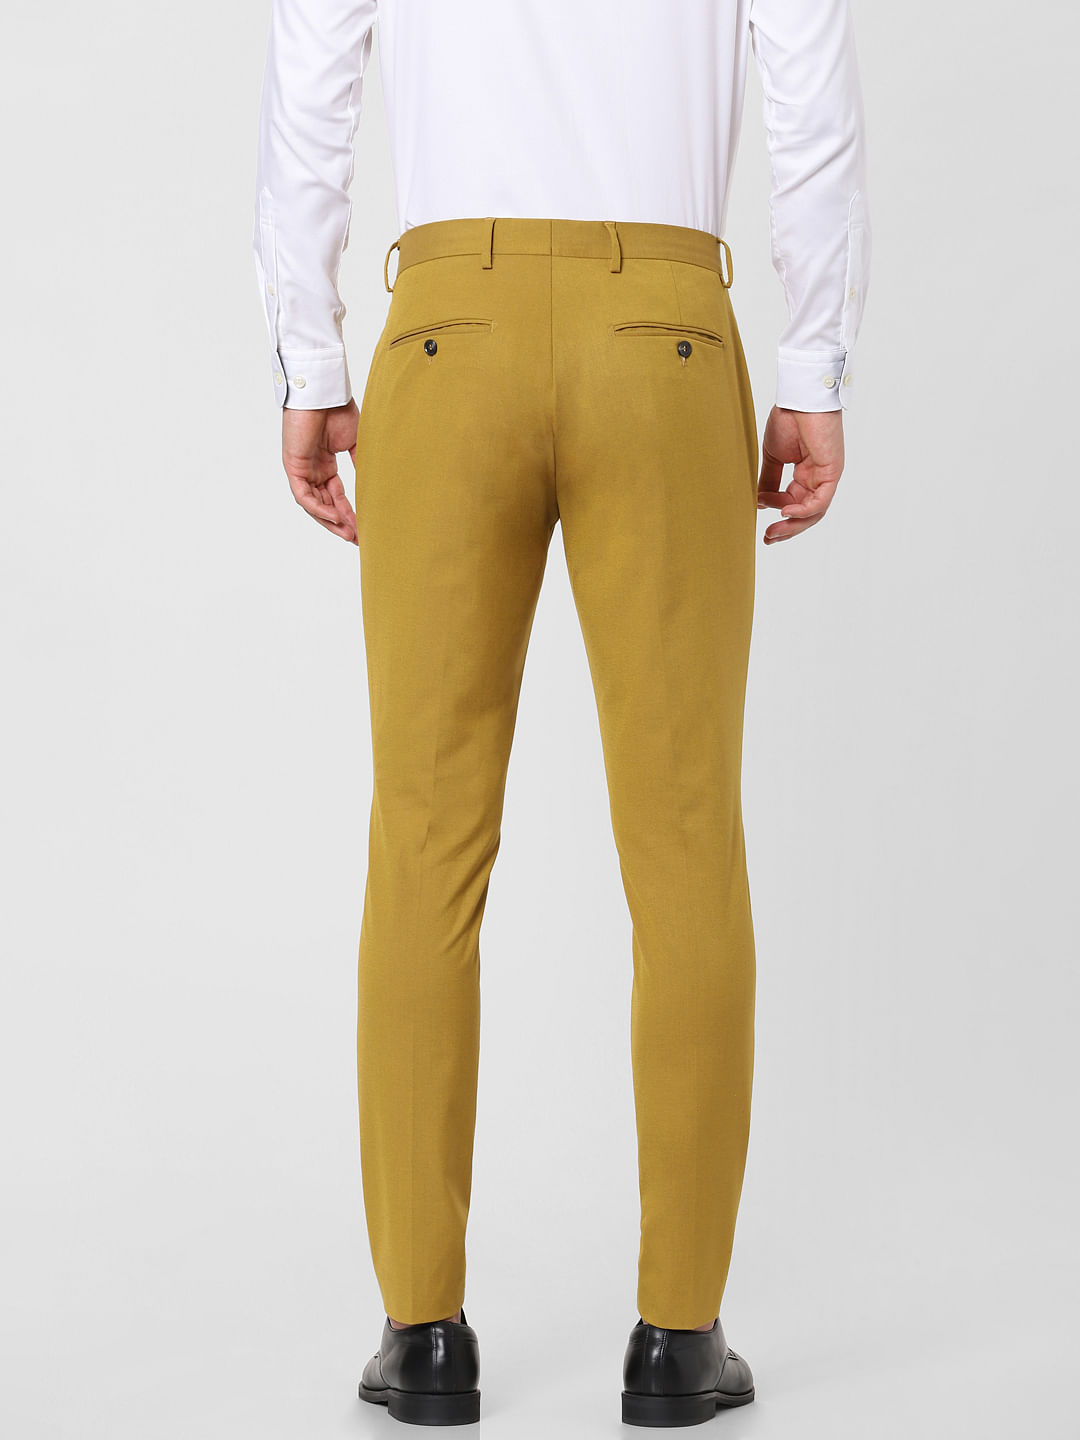 40 Inch Size Mens Trousers :Buy 40 Inch Size Mens Trousers Online at Low  Prices on Snapdeal.com